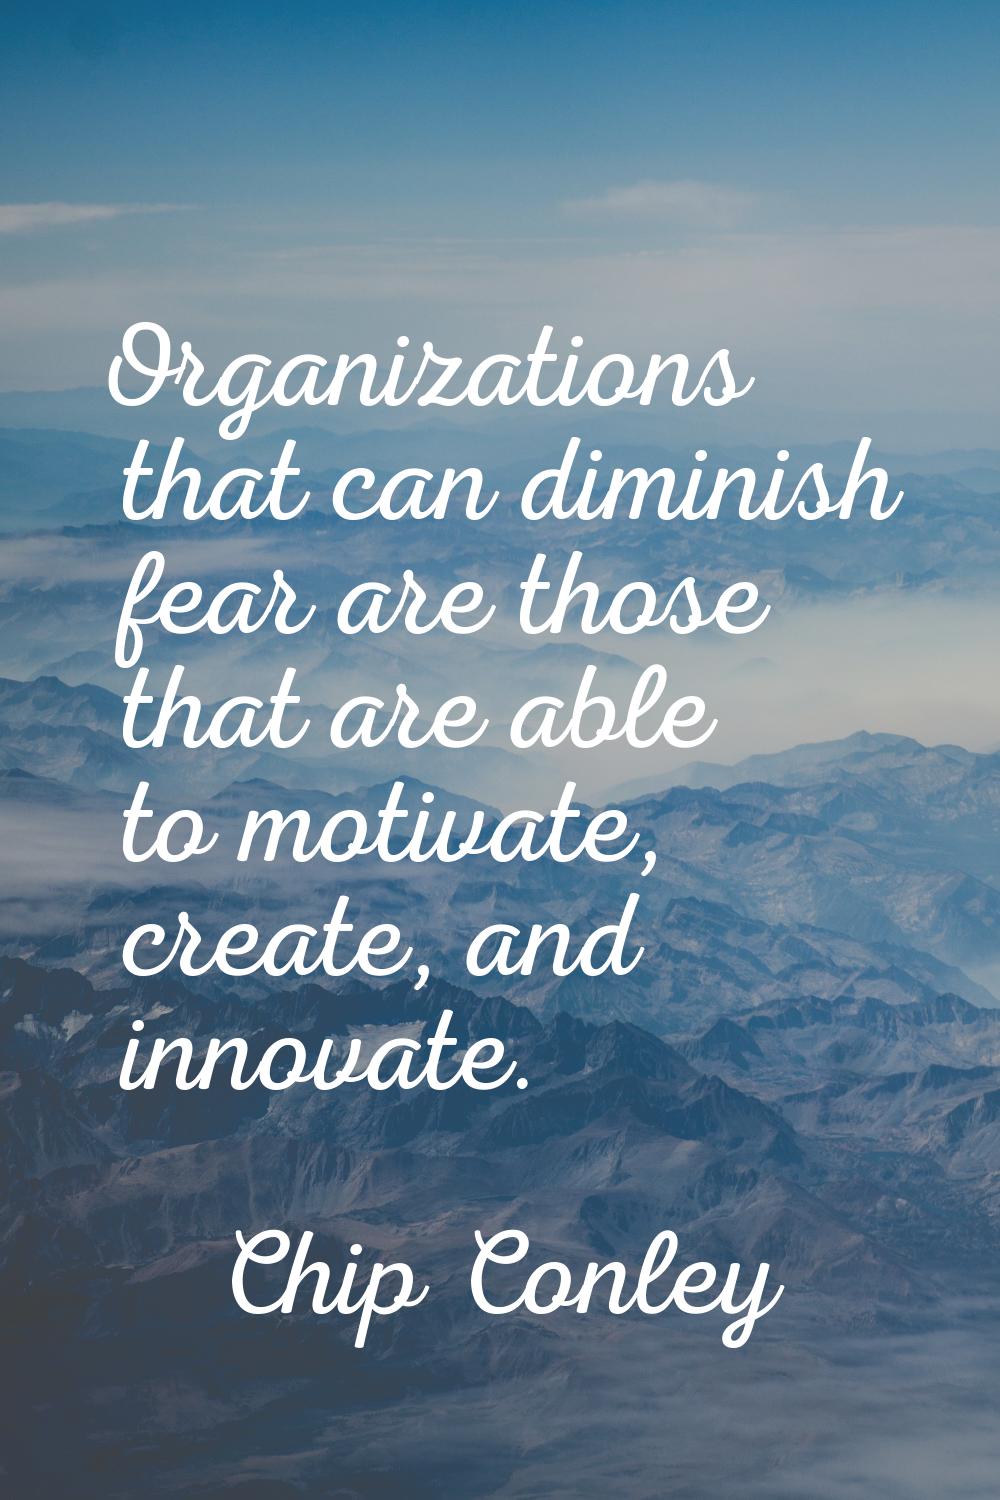 Organizations that can diminish fear are those that are able to motivate, create, and innovate.